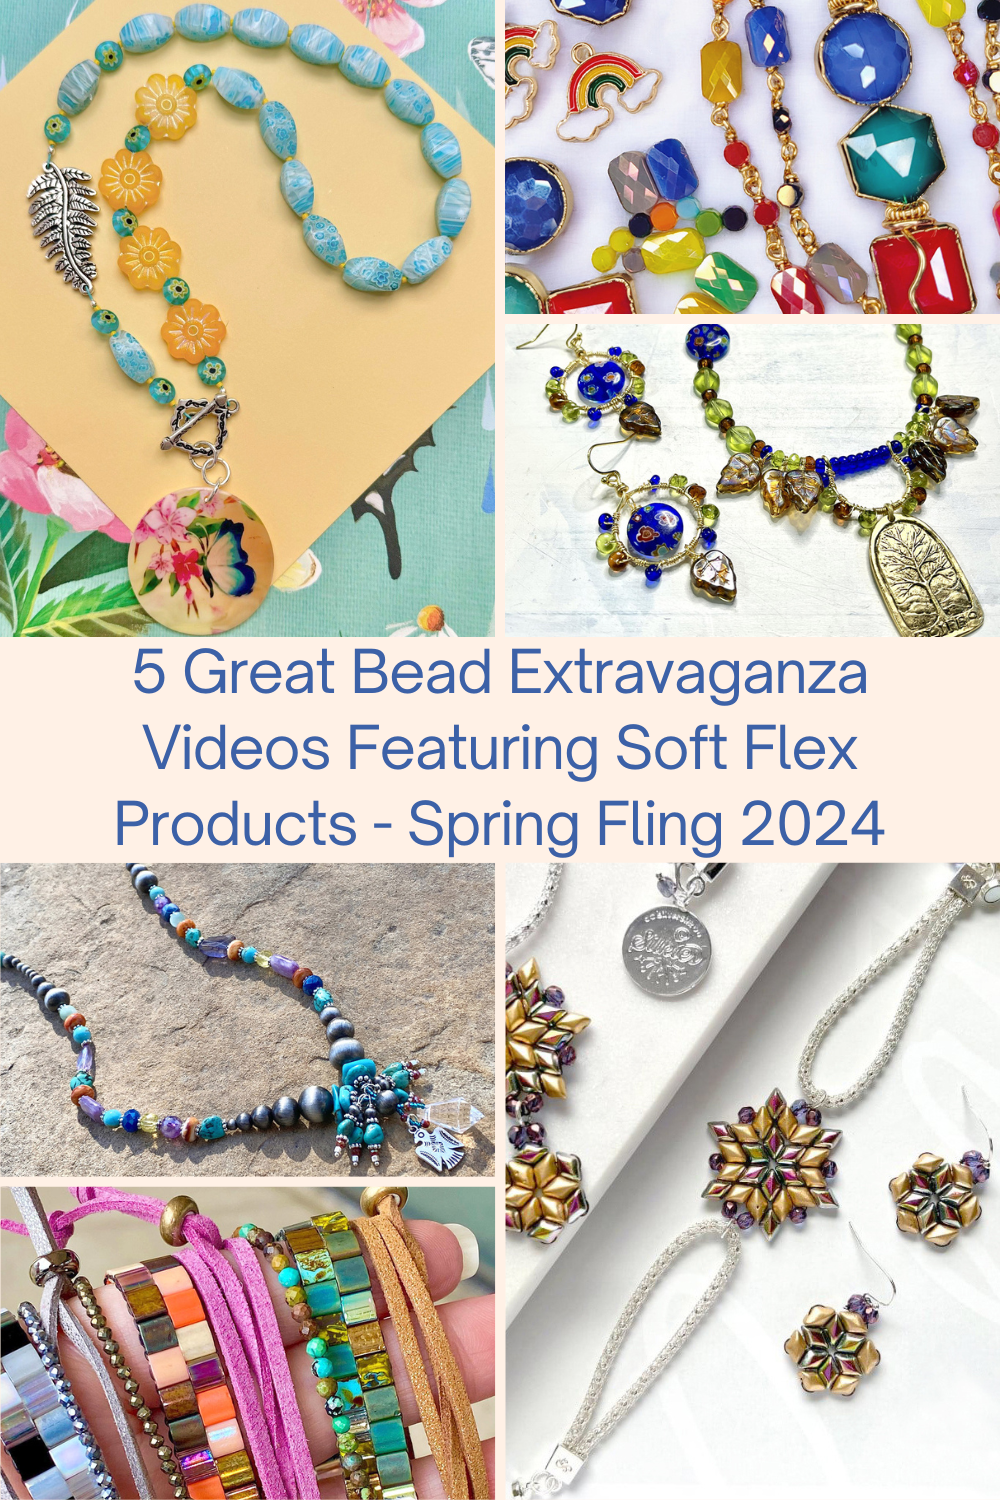 5 Great Bead Extravaganza Videos Featuring Soft Flex Products - Spring Fling 2024 Collage